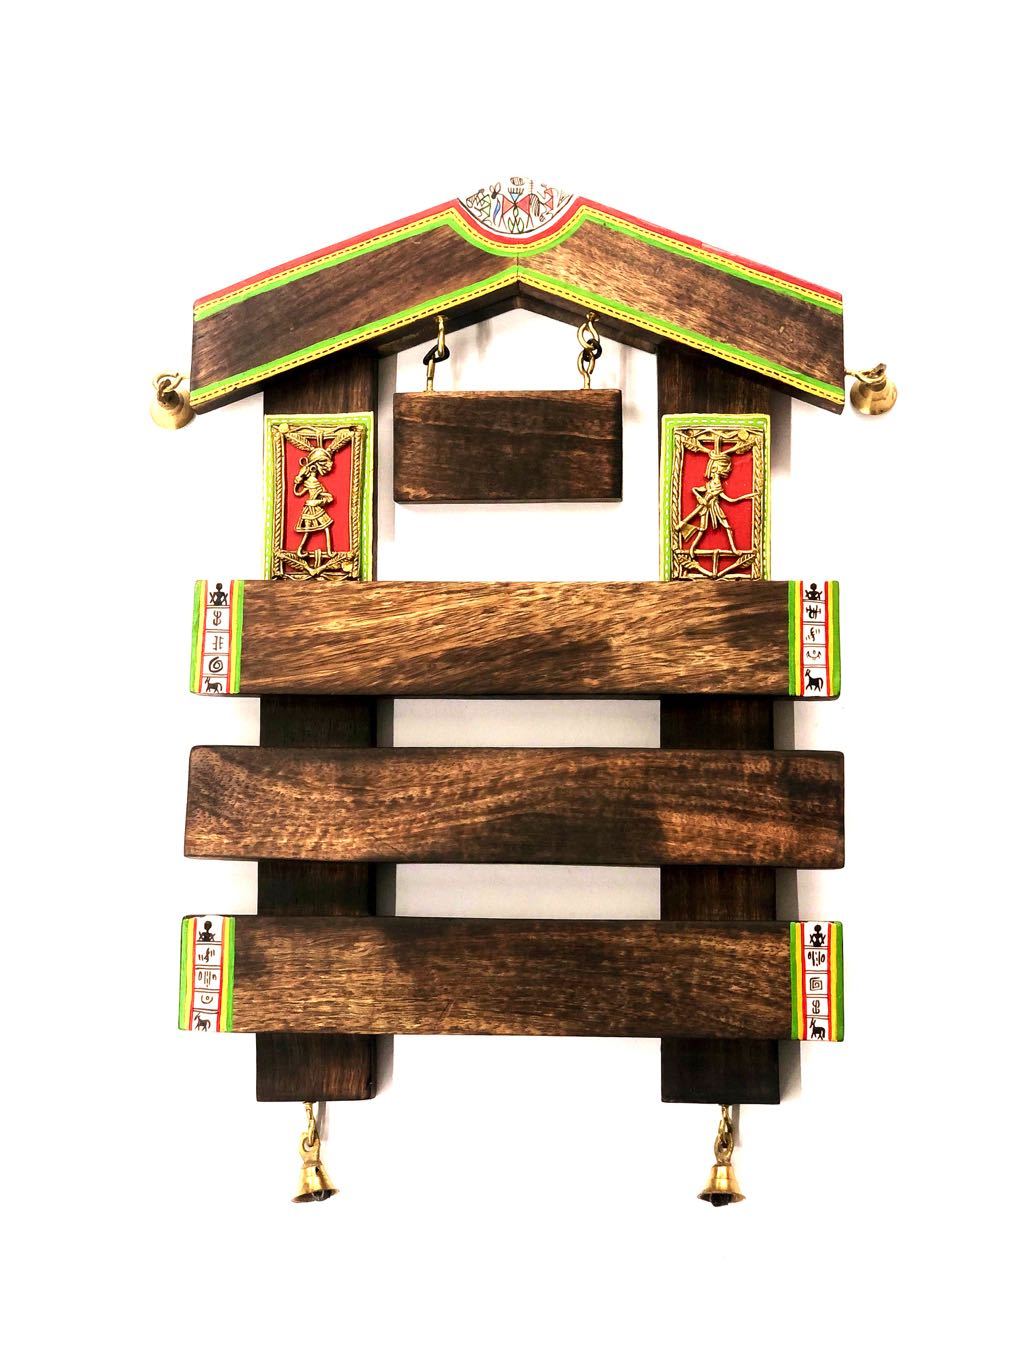 Unique Hut Shaped Wooden Name Plate With Bells HandPainted Tamrapatra - Tamrapatra